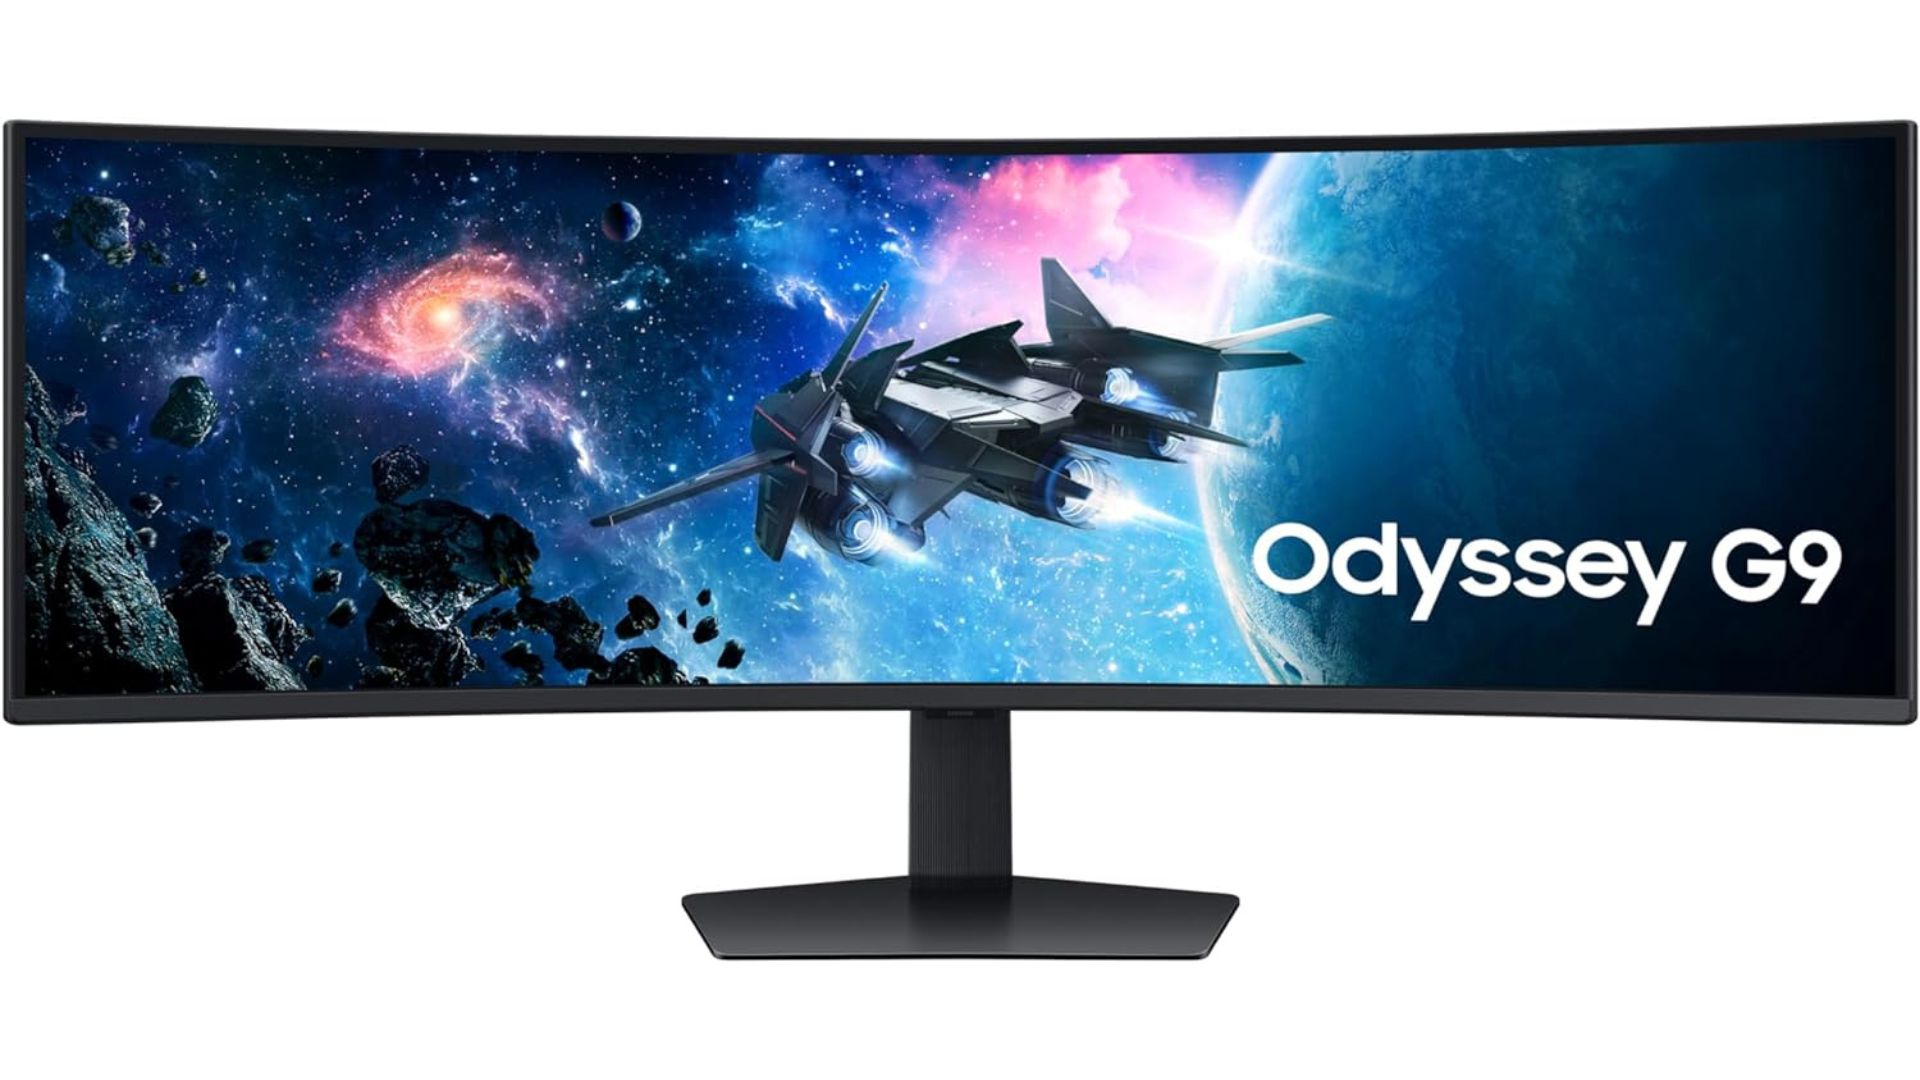 Image of the SAMSUNG 49-Inch Odyssey G9